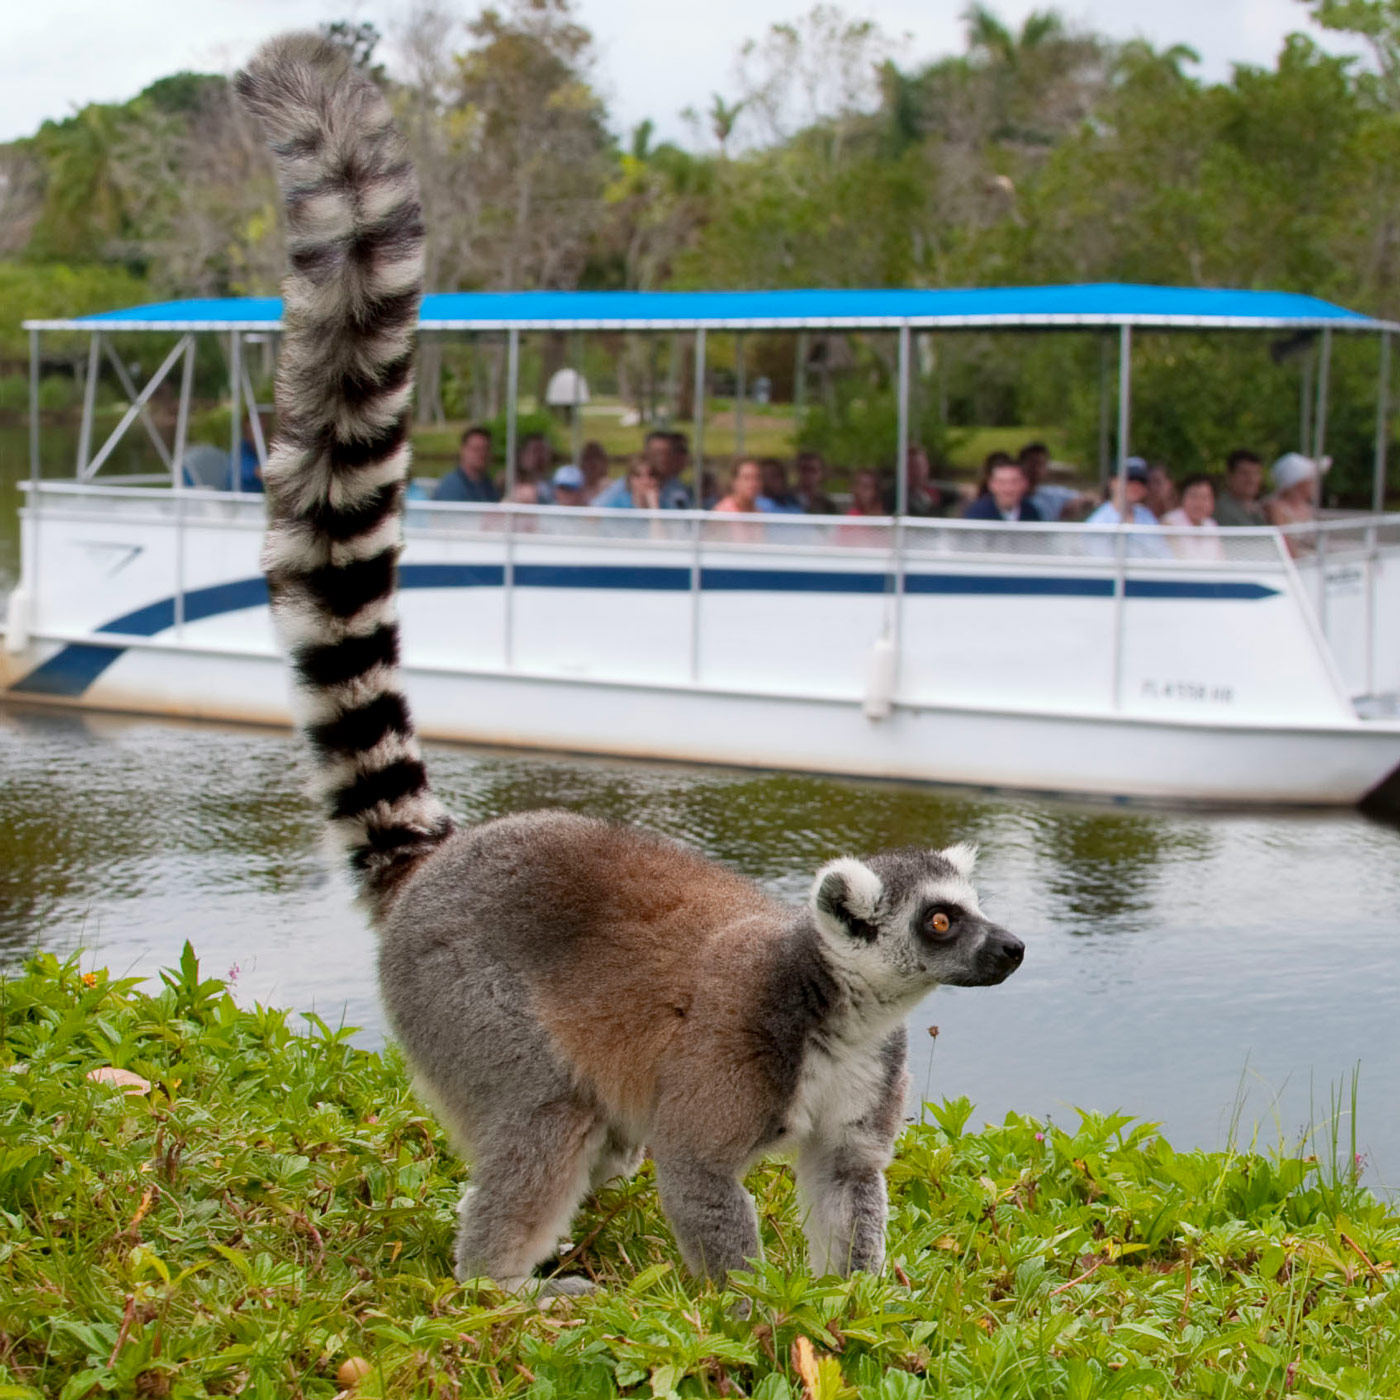 Animal viewing from river boat at Naples Zoo